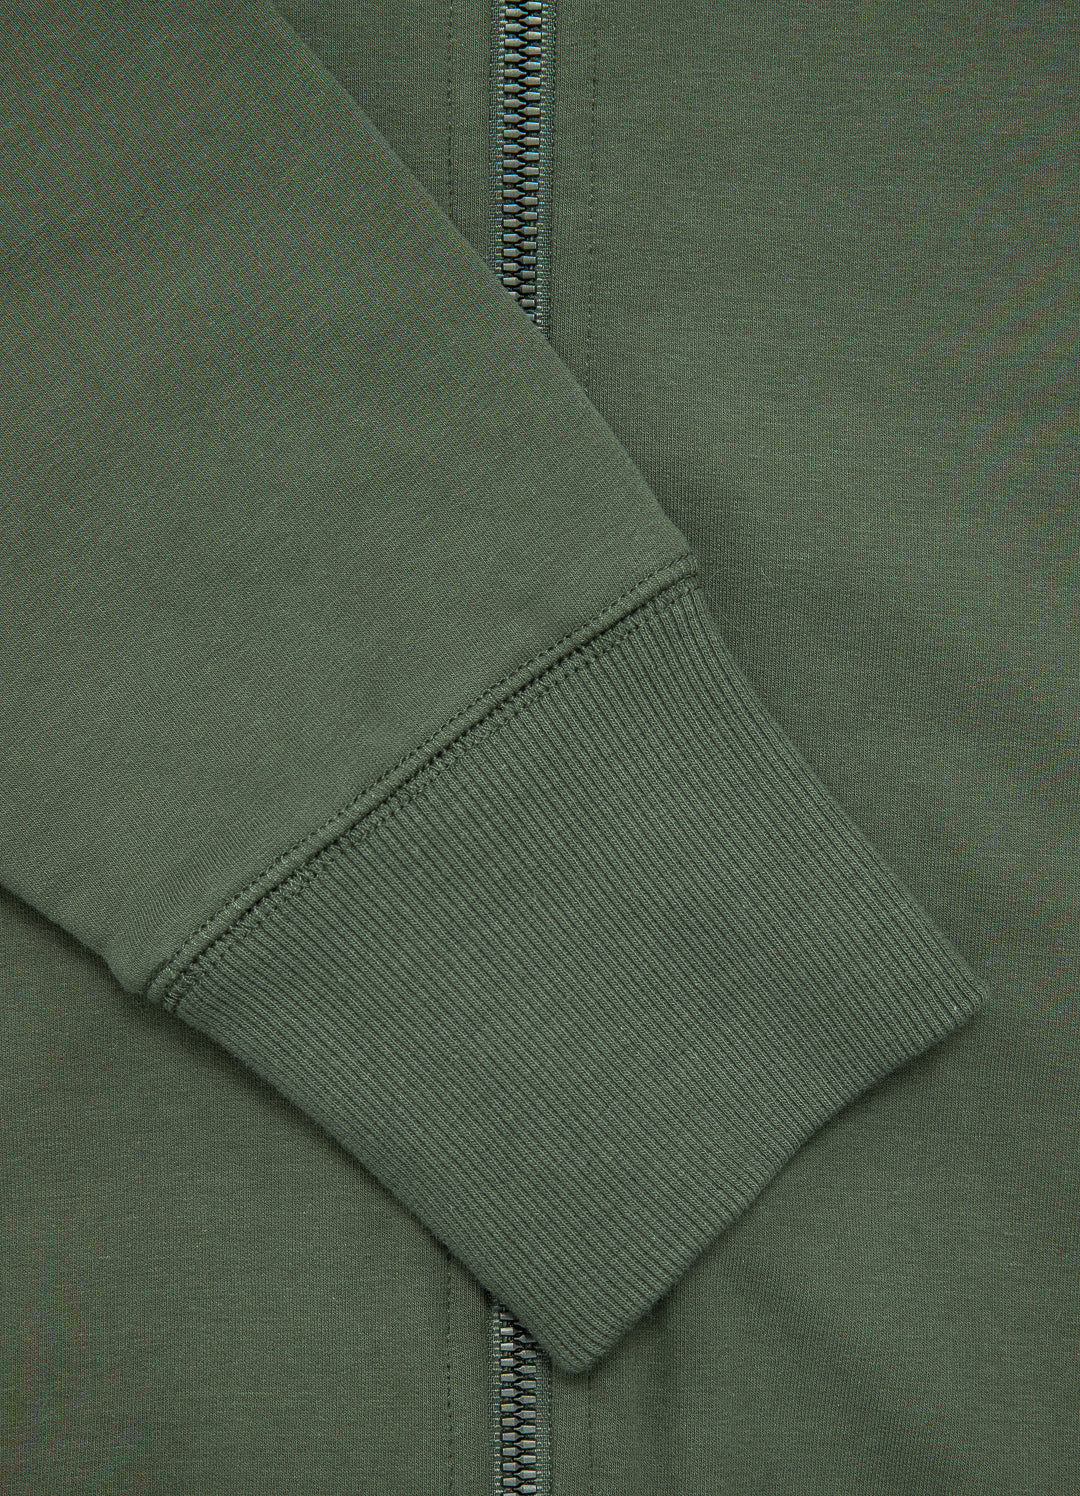 VETTER French Terry Olive Sweatjacket